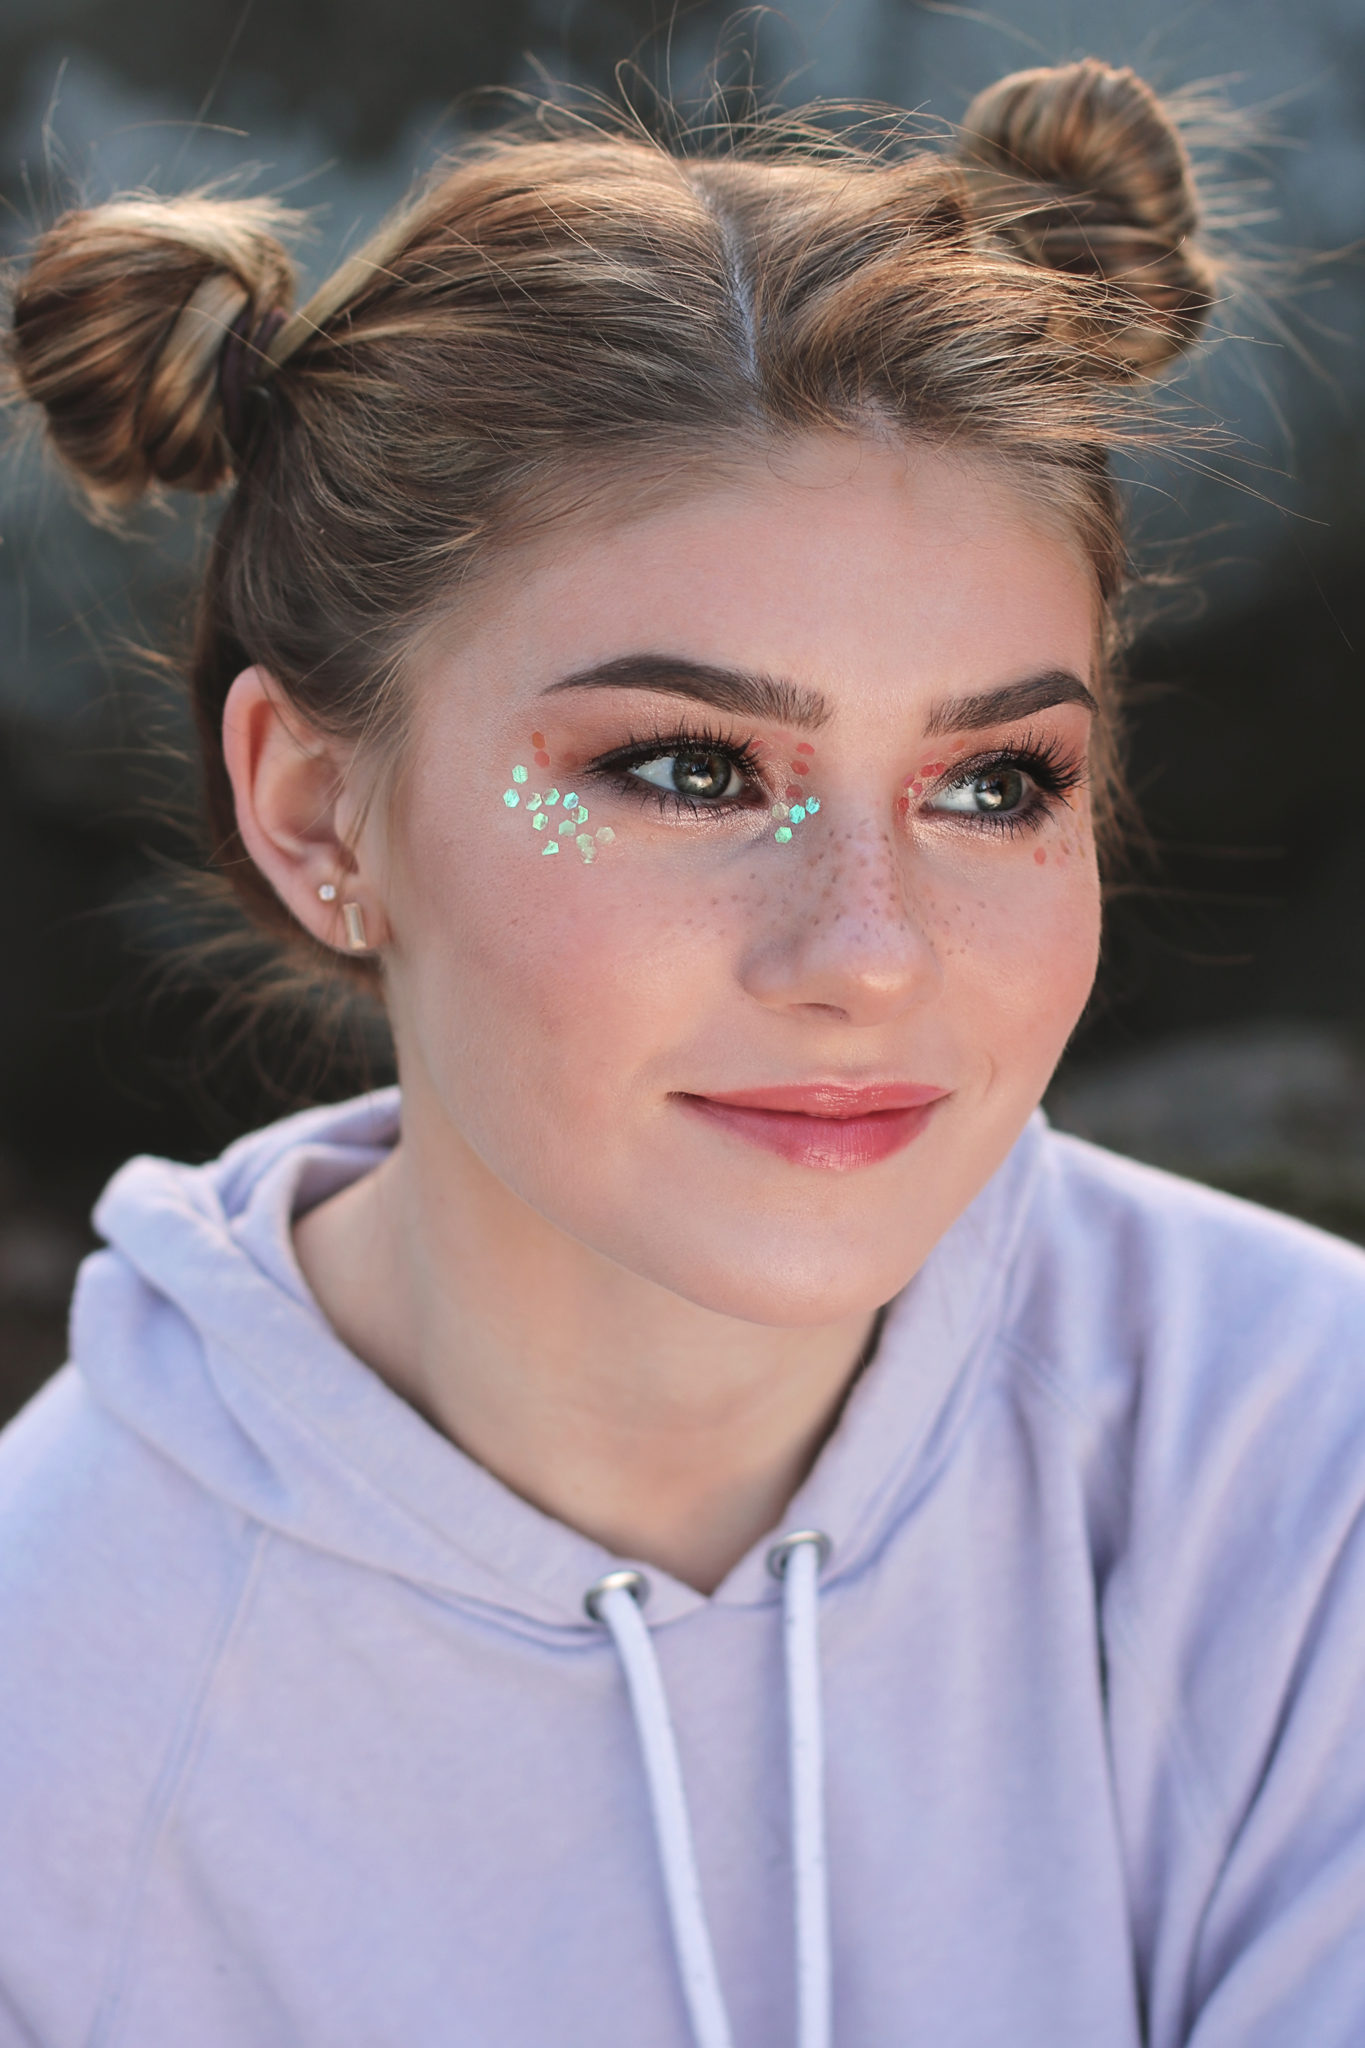 My sparkly festival makeup tutorial is up on YouTube. Search for Sand Sun & Messy Buns!